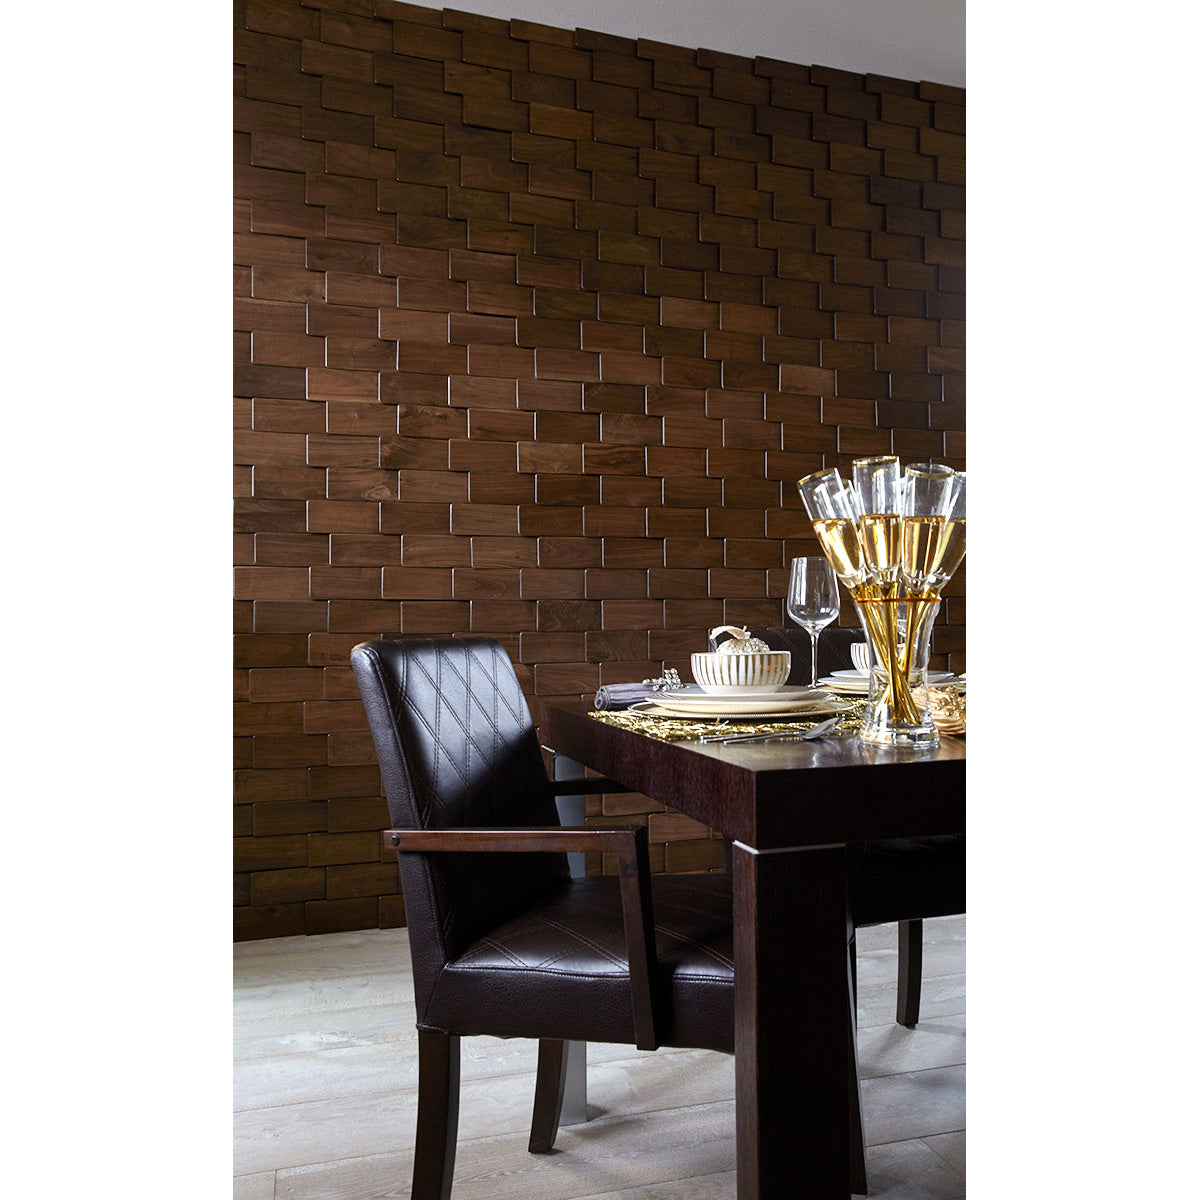 DuChateau - Scale | Reckt Wall Coverings - Room Scene